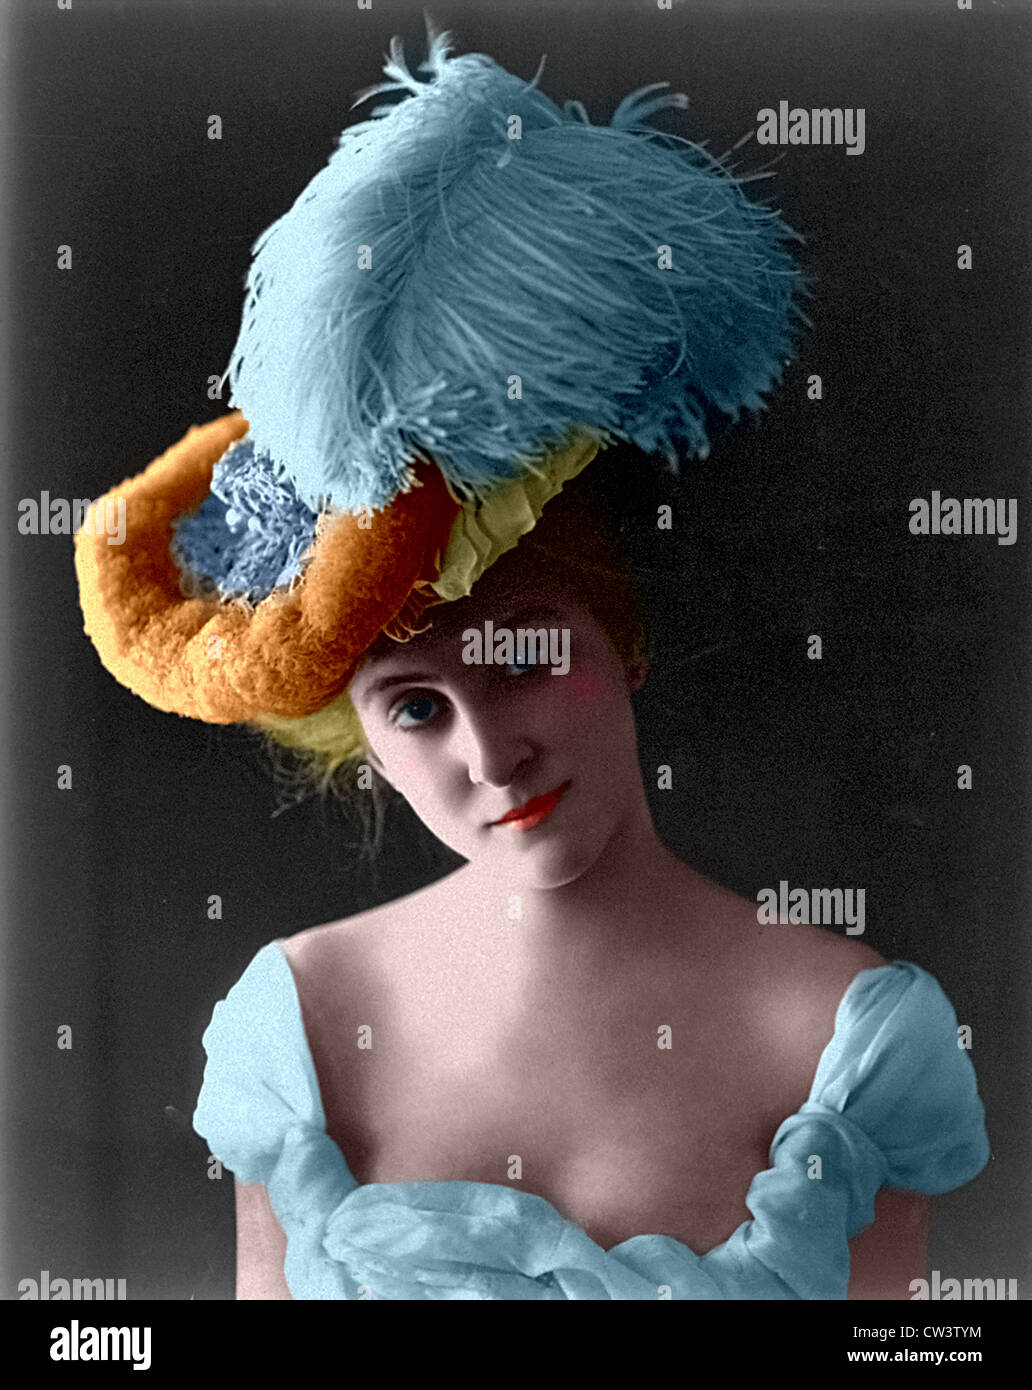 Lady with a feathered hat Stock Photo